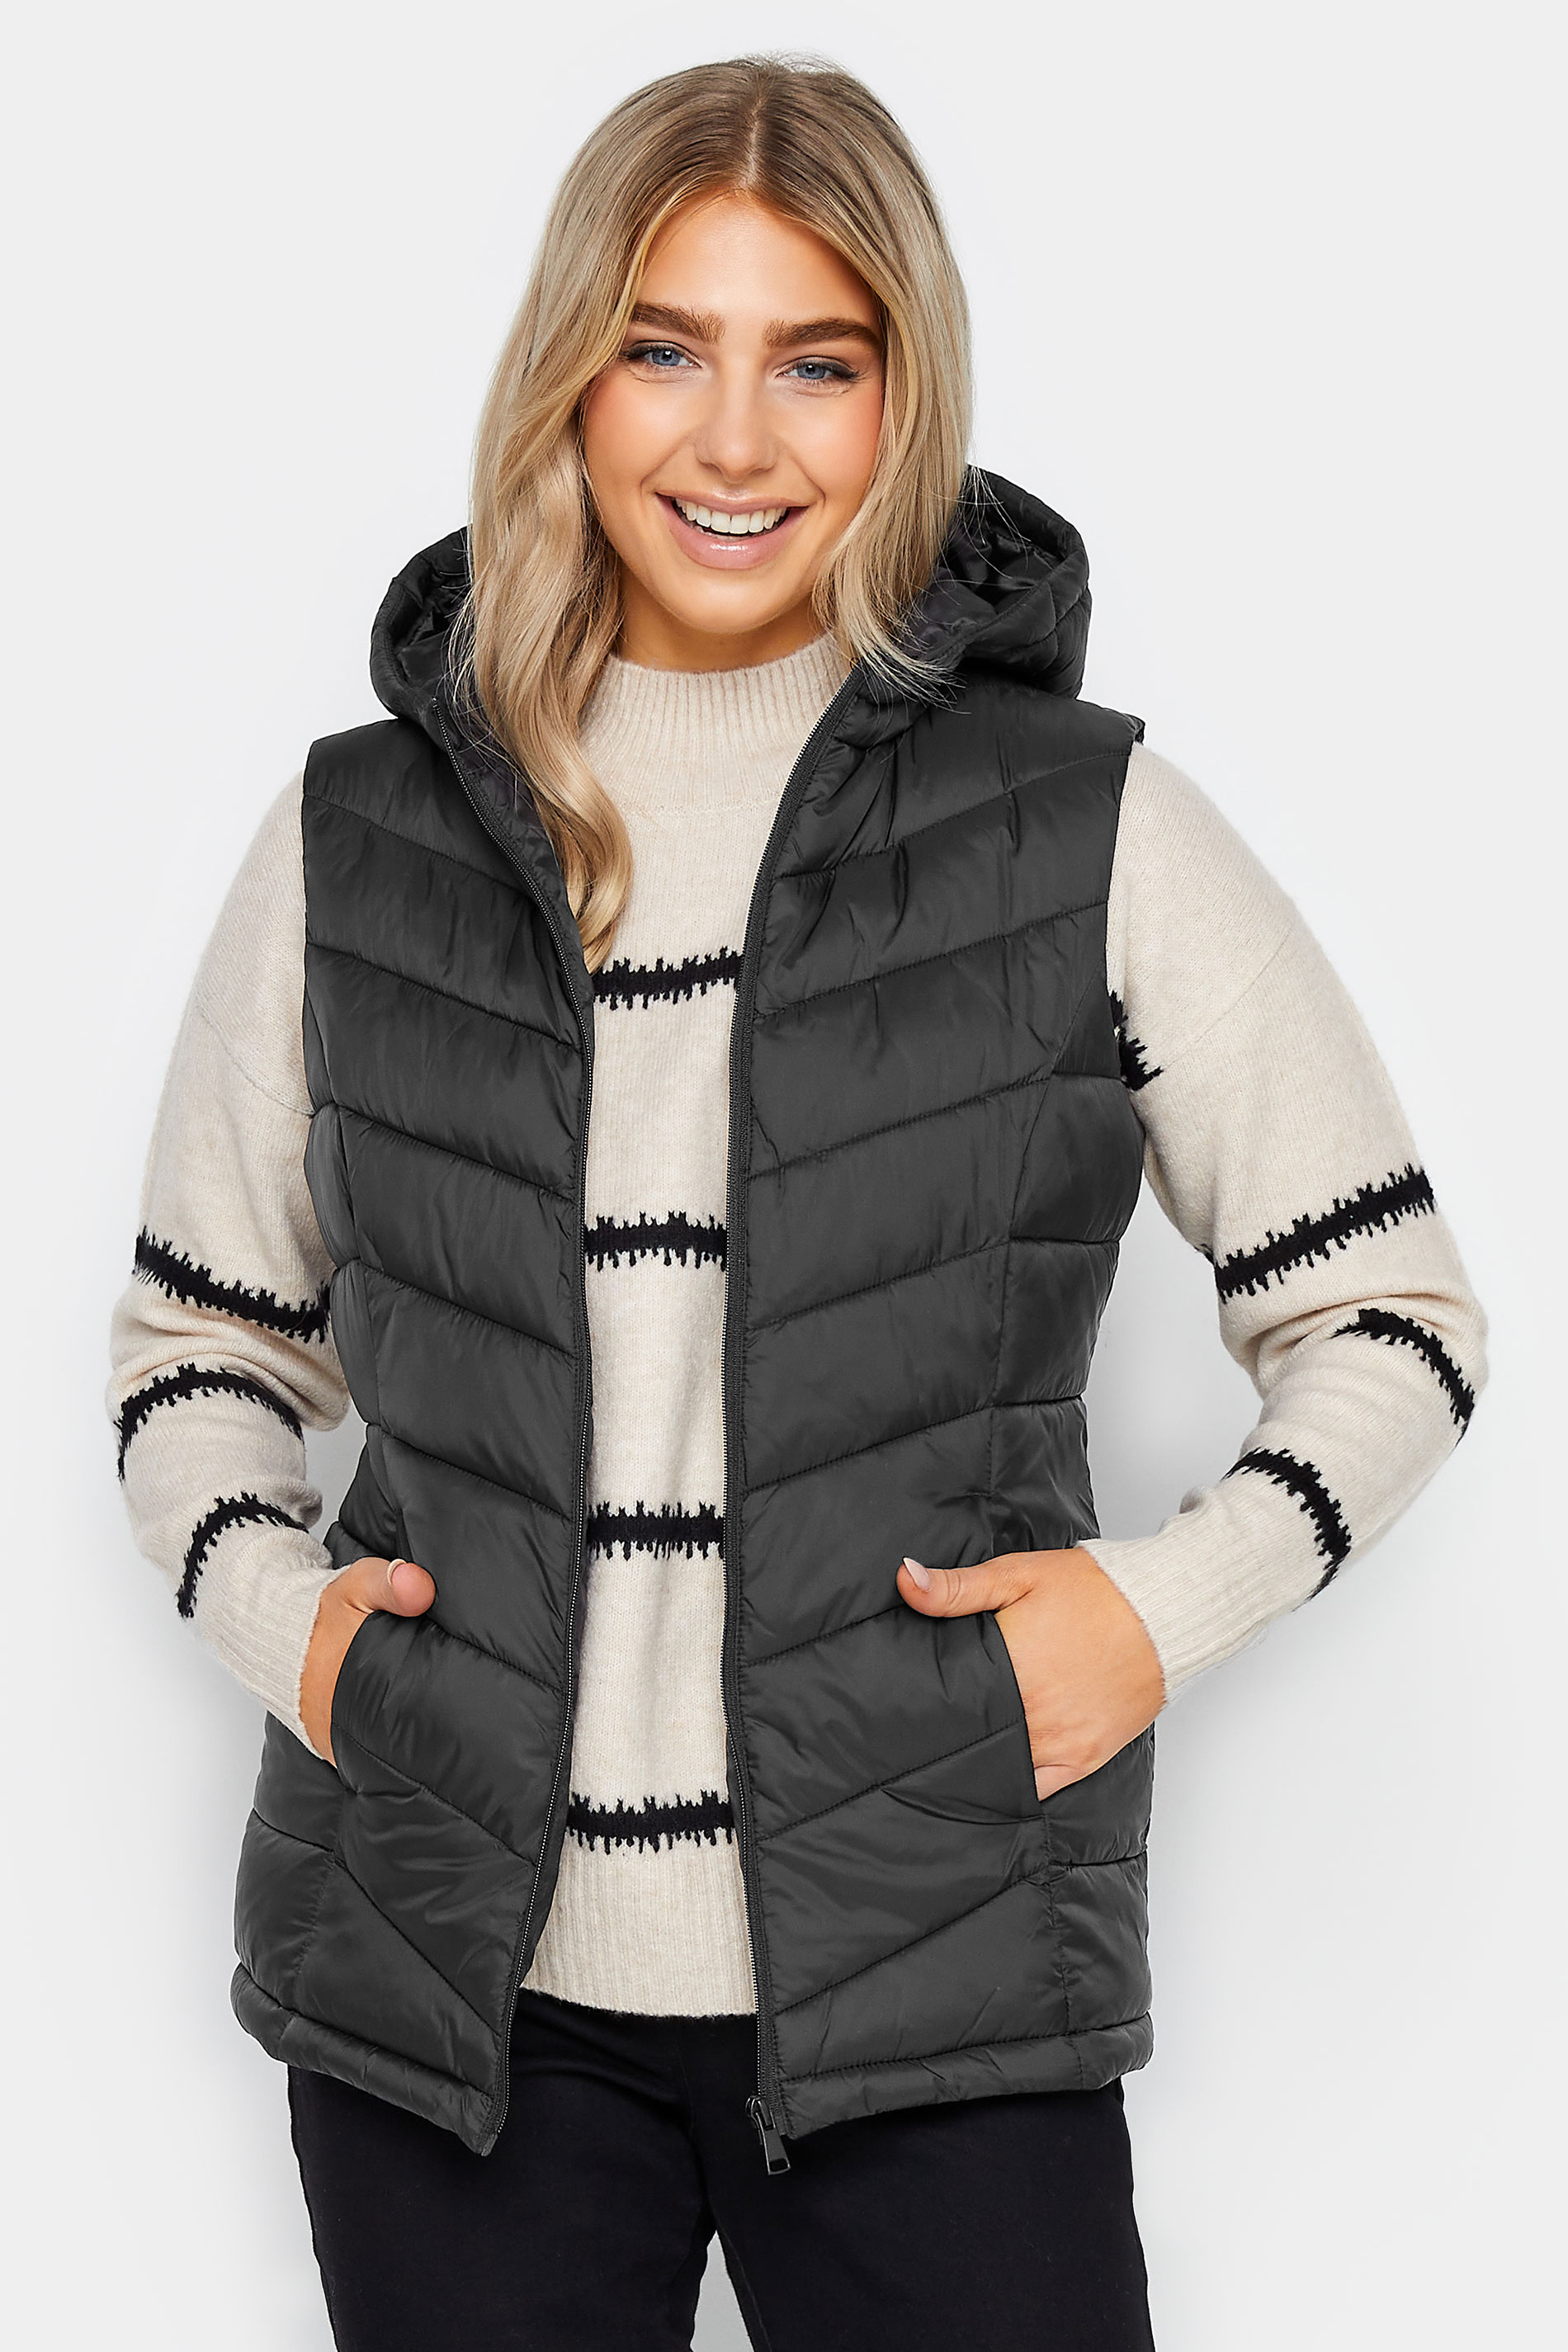 M&Co Black Quilted Gilet | M&Co 1